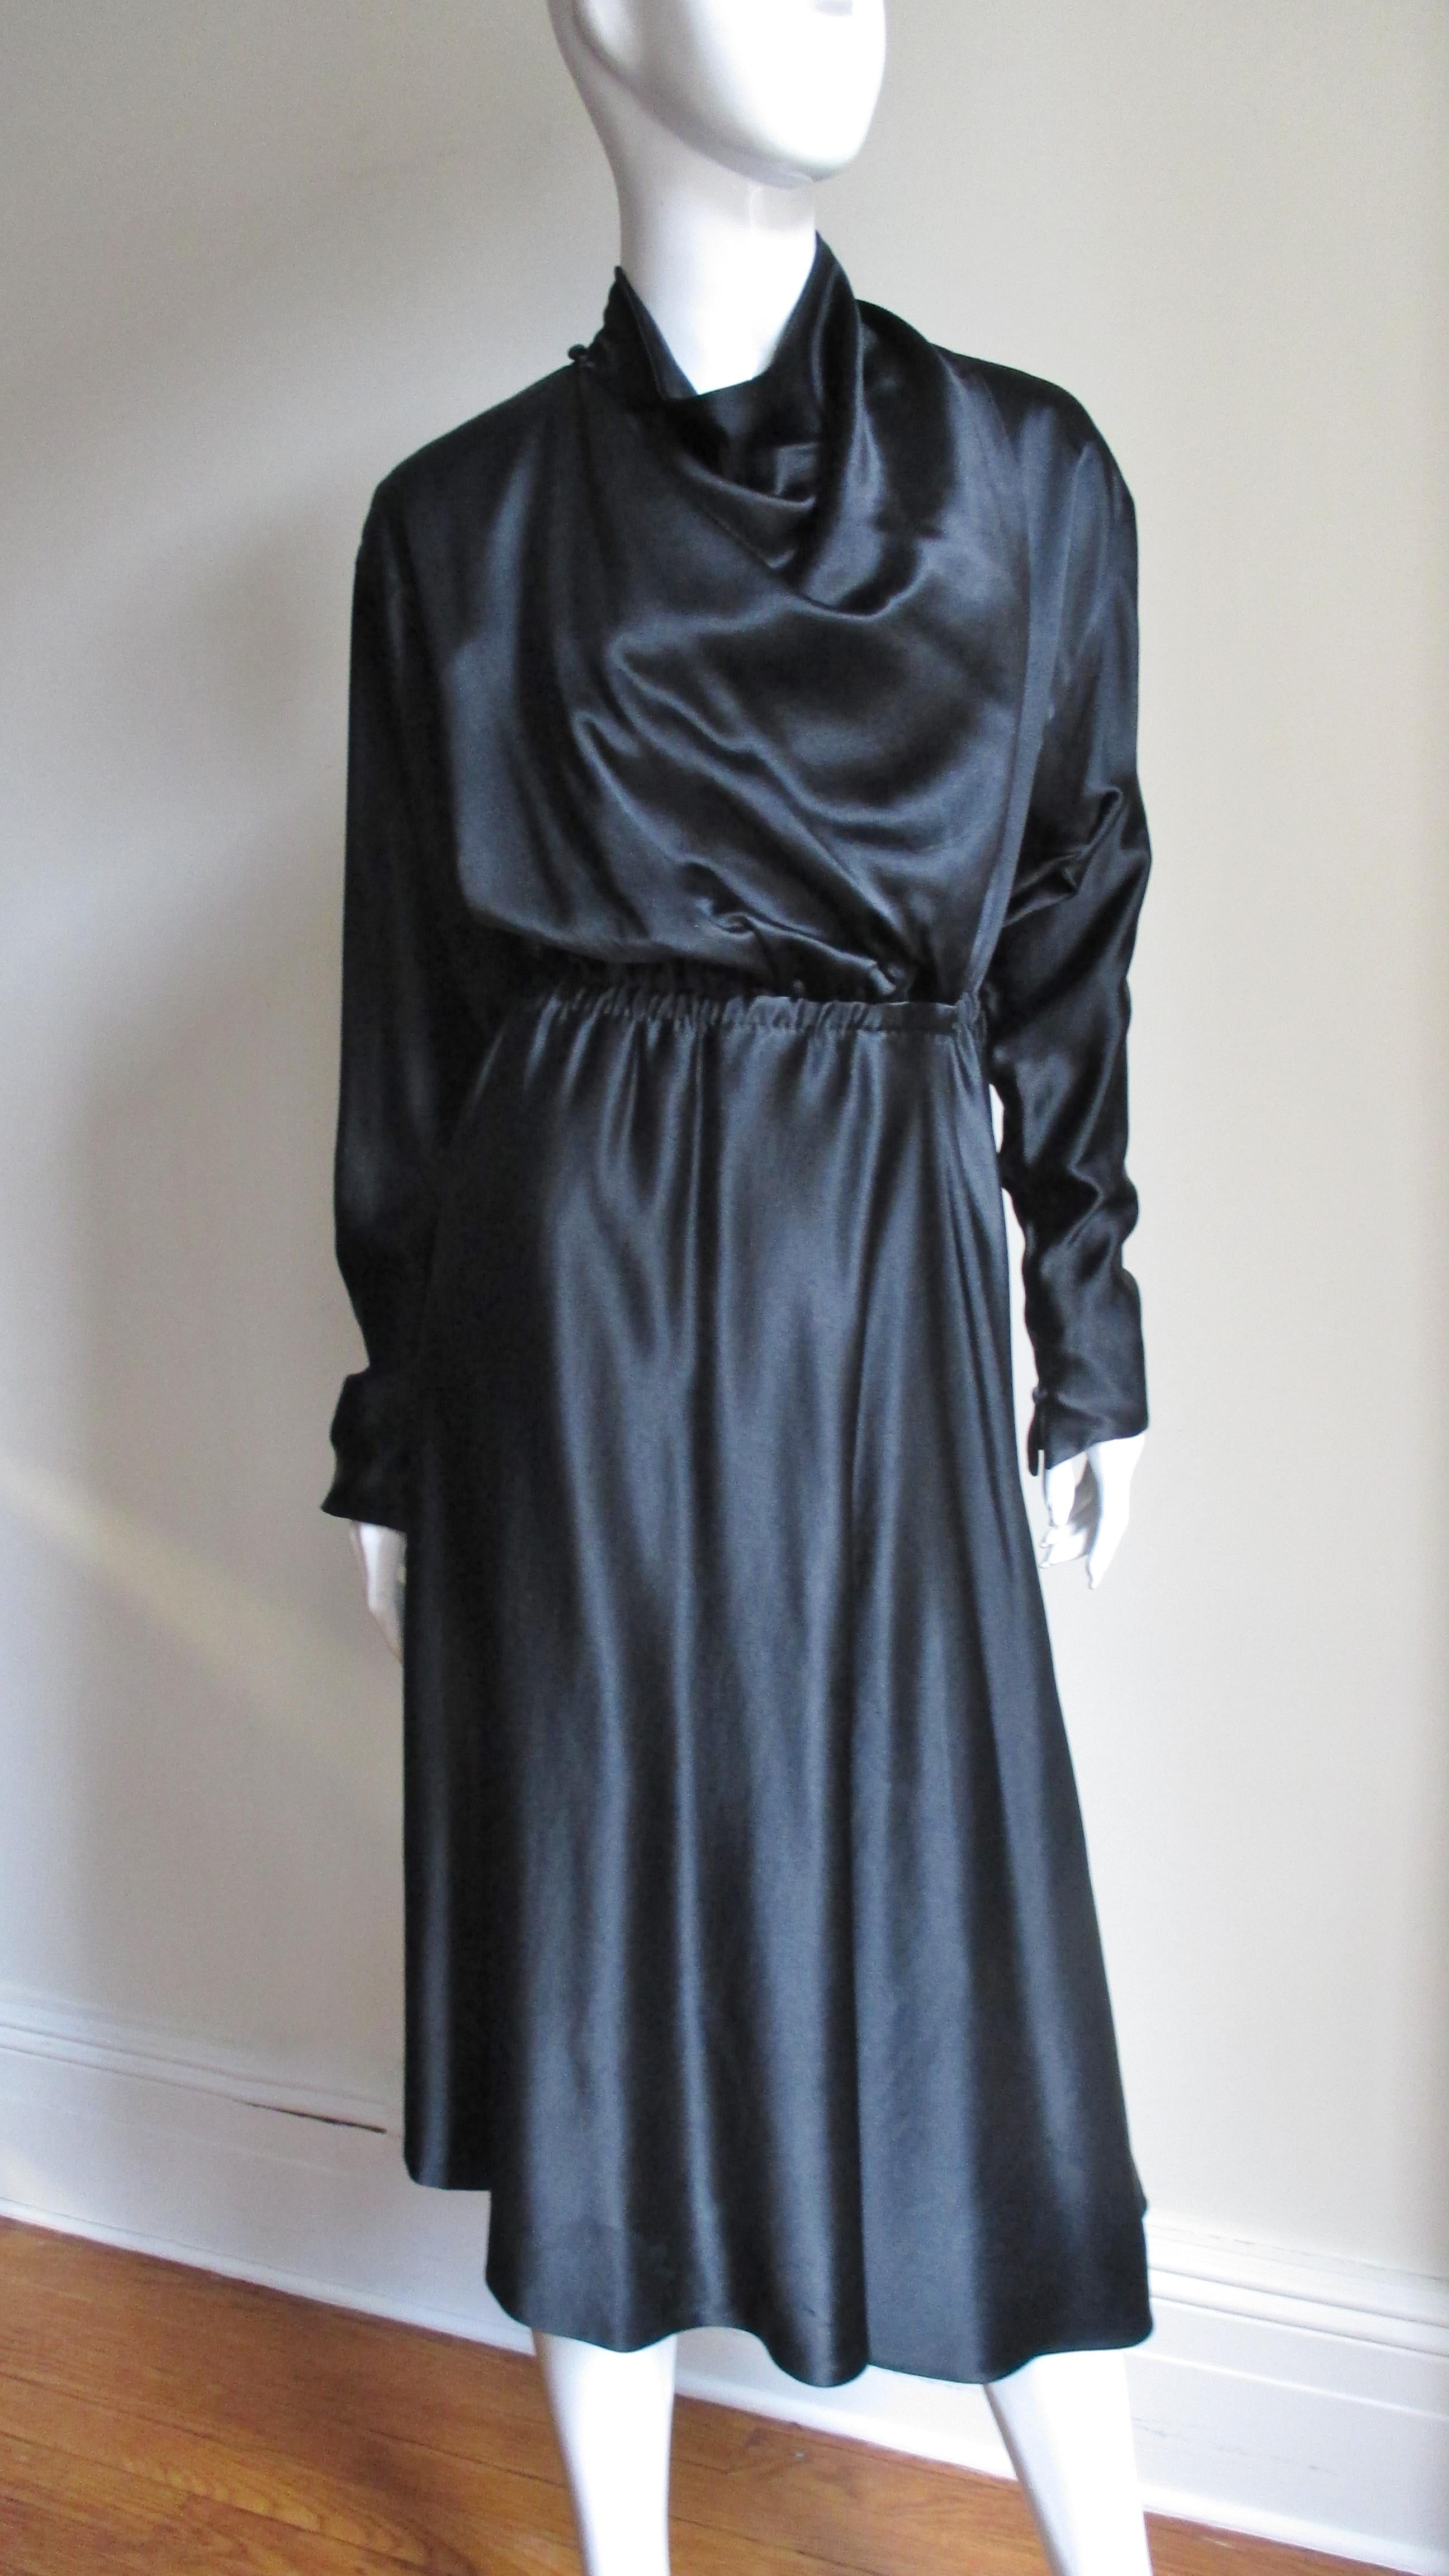 A gorgeous rich black silk wrap dress by Halston. It has a wrap front, draped neckline buttoning at the shoulder and long dolman sleeves with pointed button cuffs. The waist is gathered and has stretch allowing for a flexible, comfortable fit with a